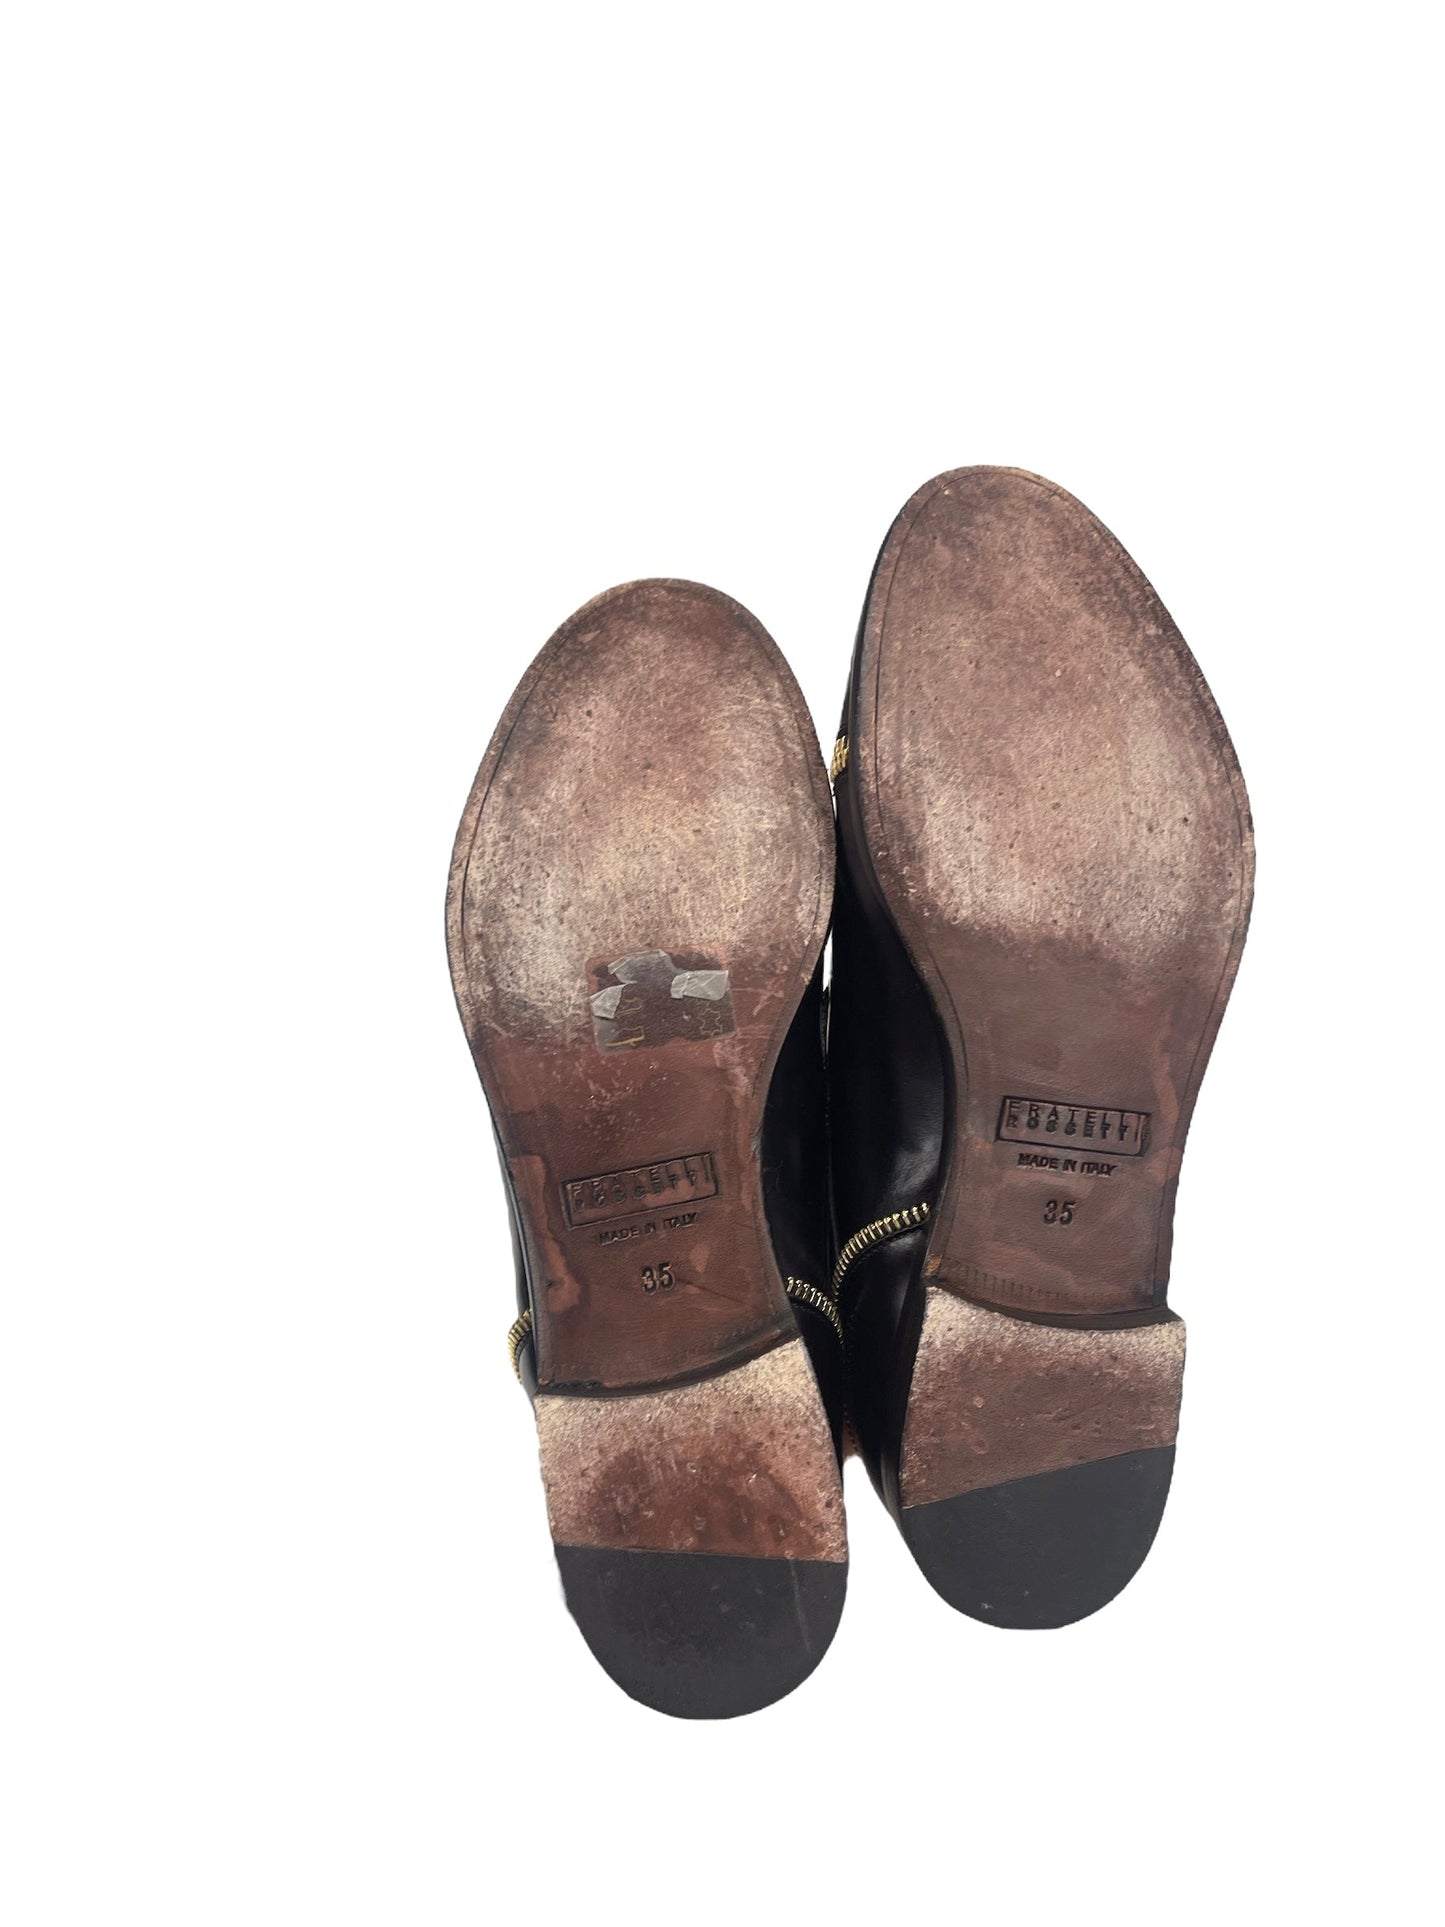 Shoes Flats Loafer Oxford By Fratelli Rossetti